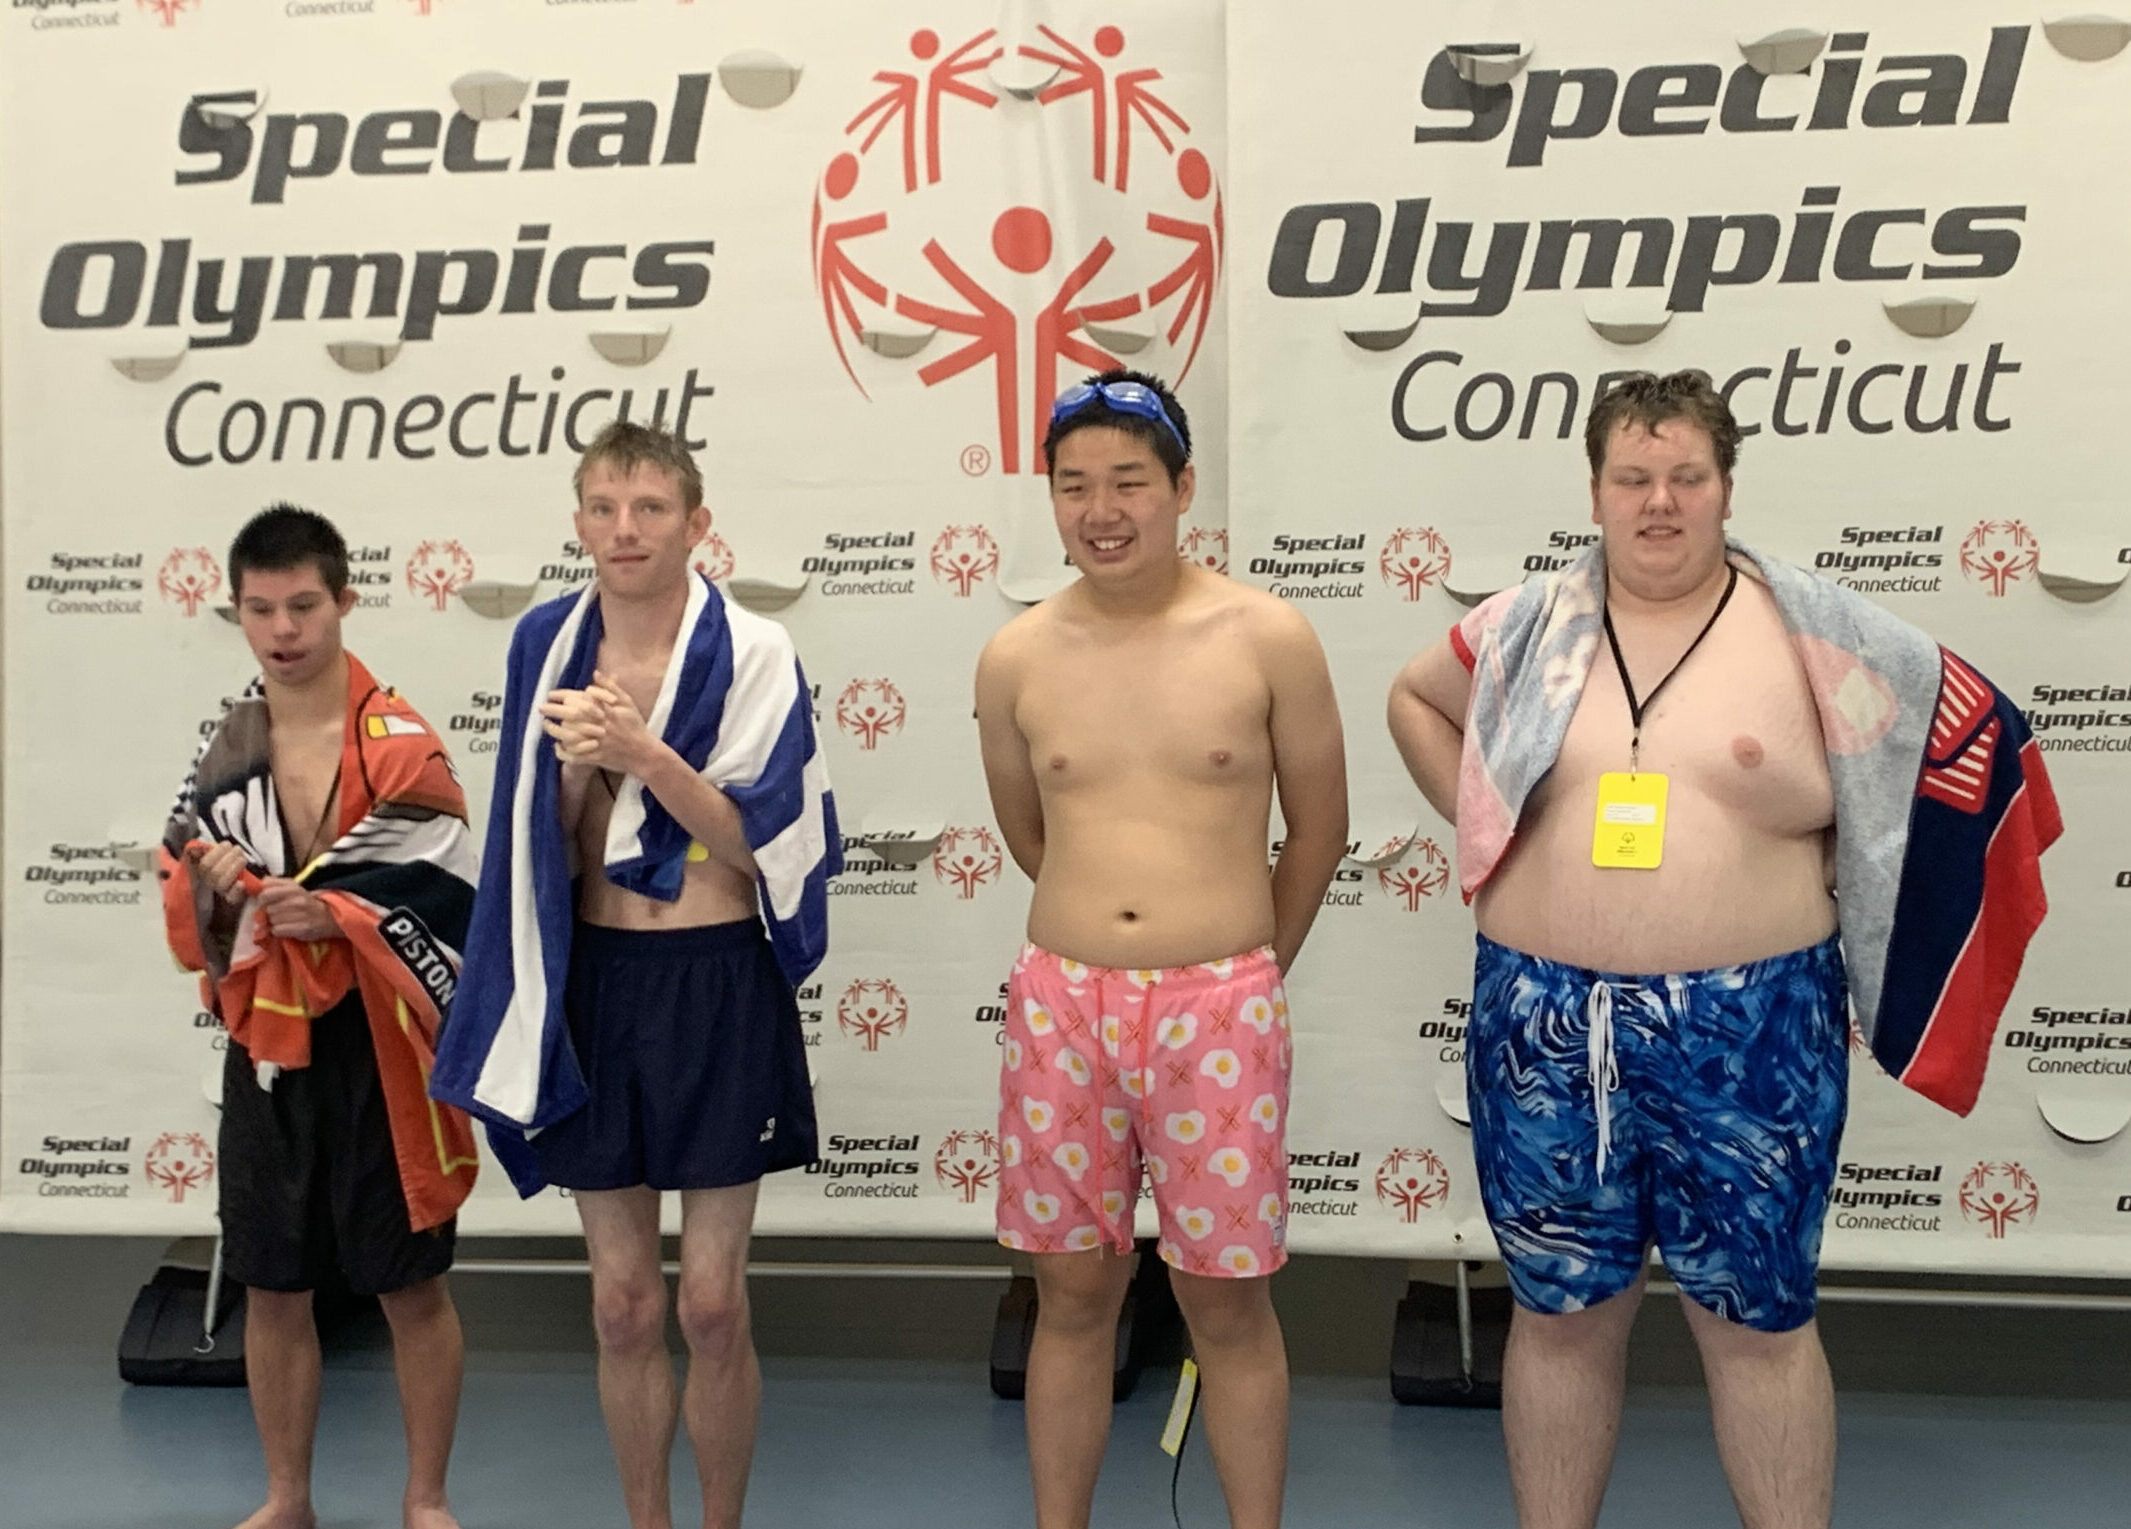 Ian, Special Olympics Athlete 3rd from left